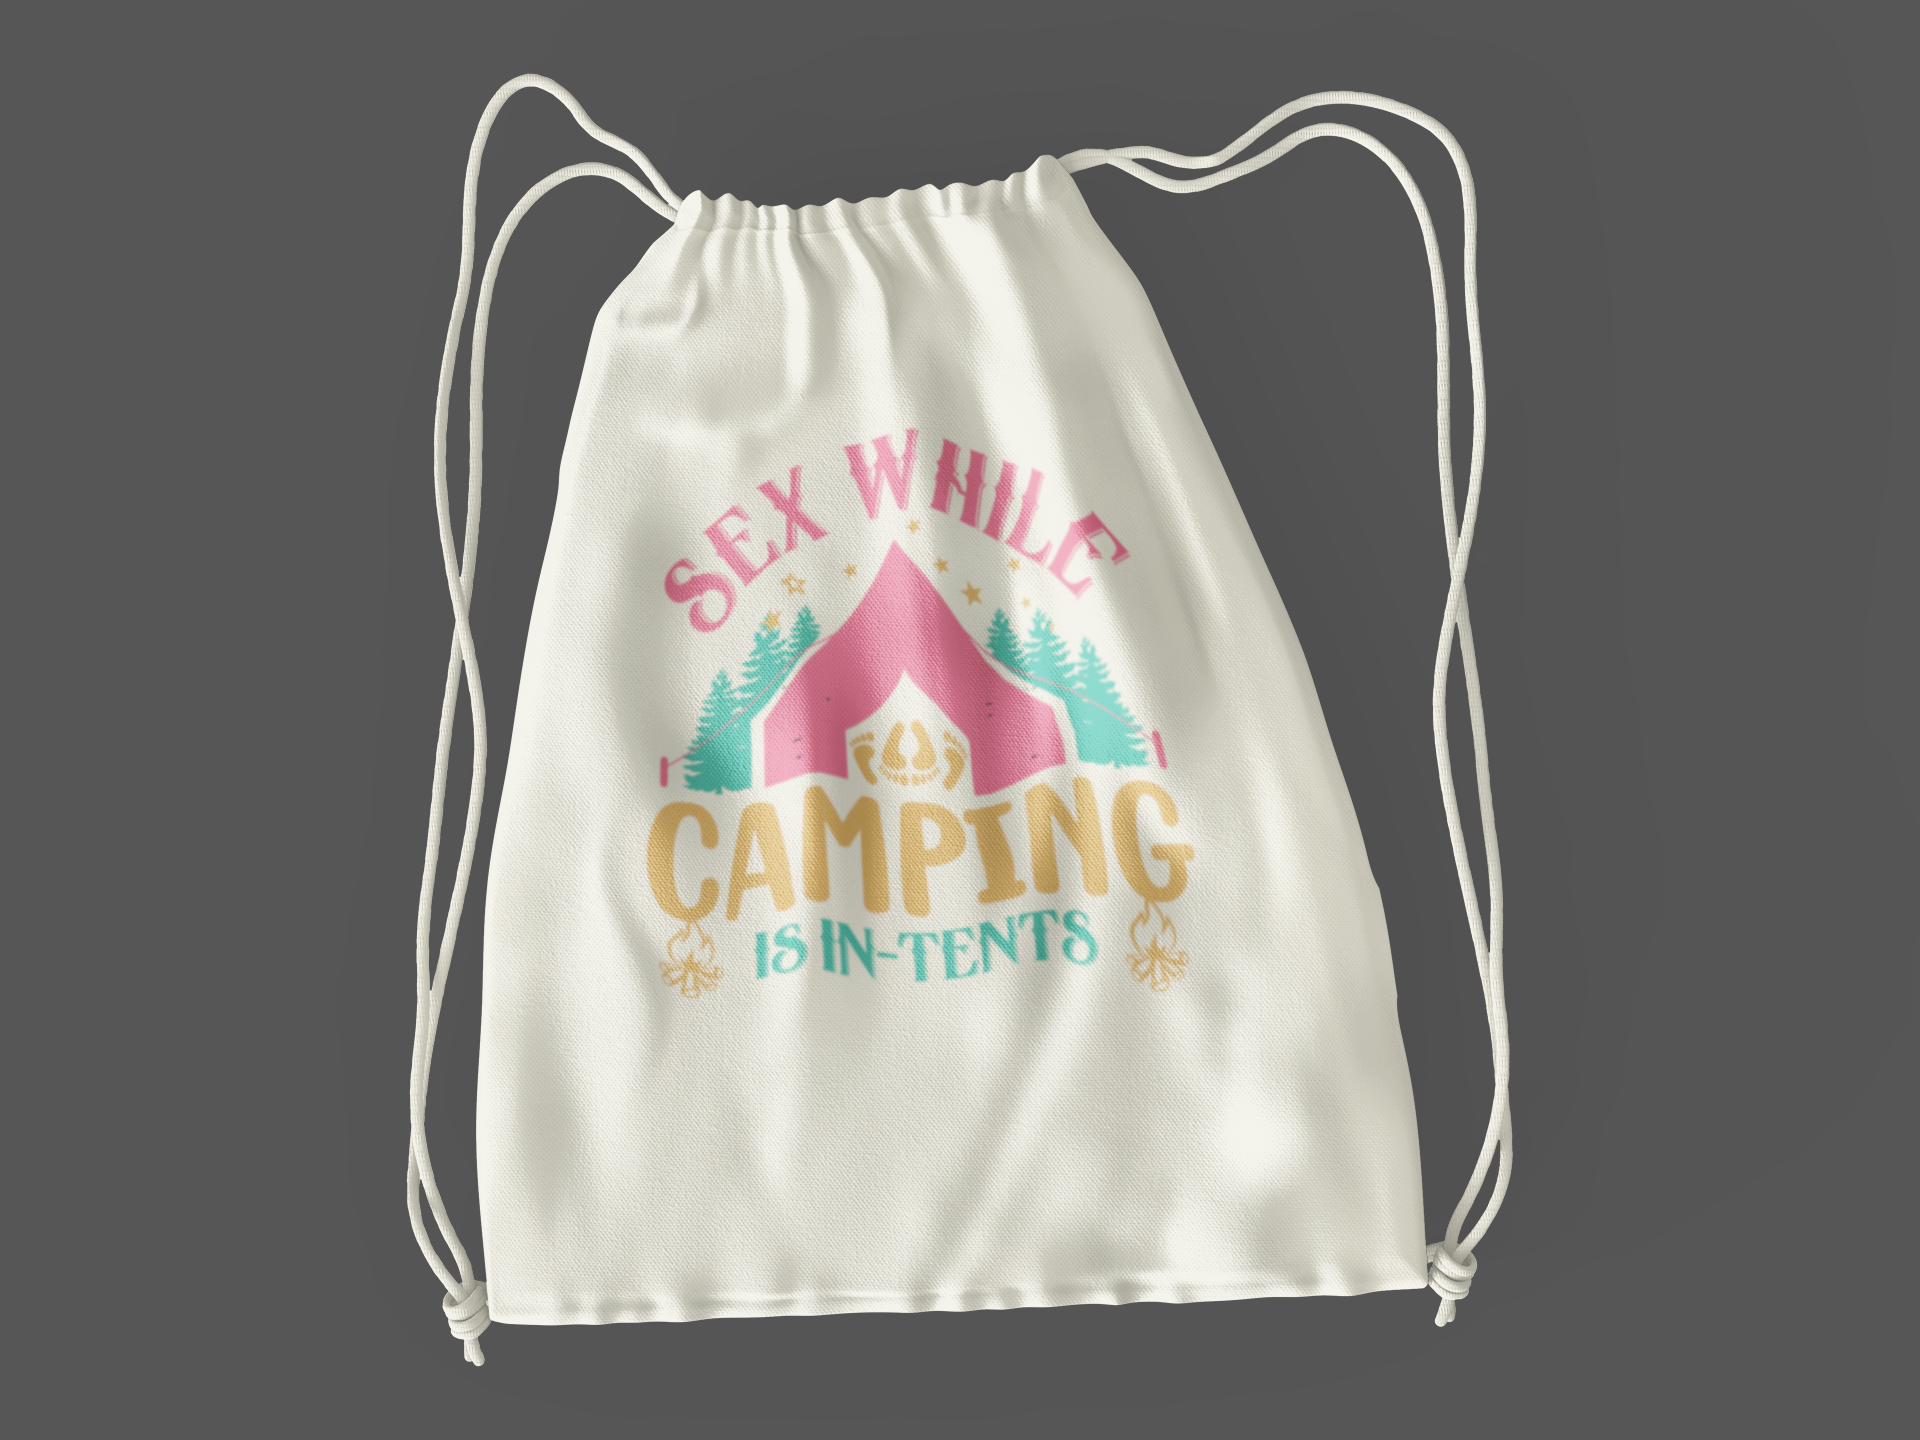 Sex while camping; 100% Cotton sheeting Dyed-to match draw cord closure